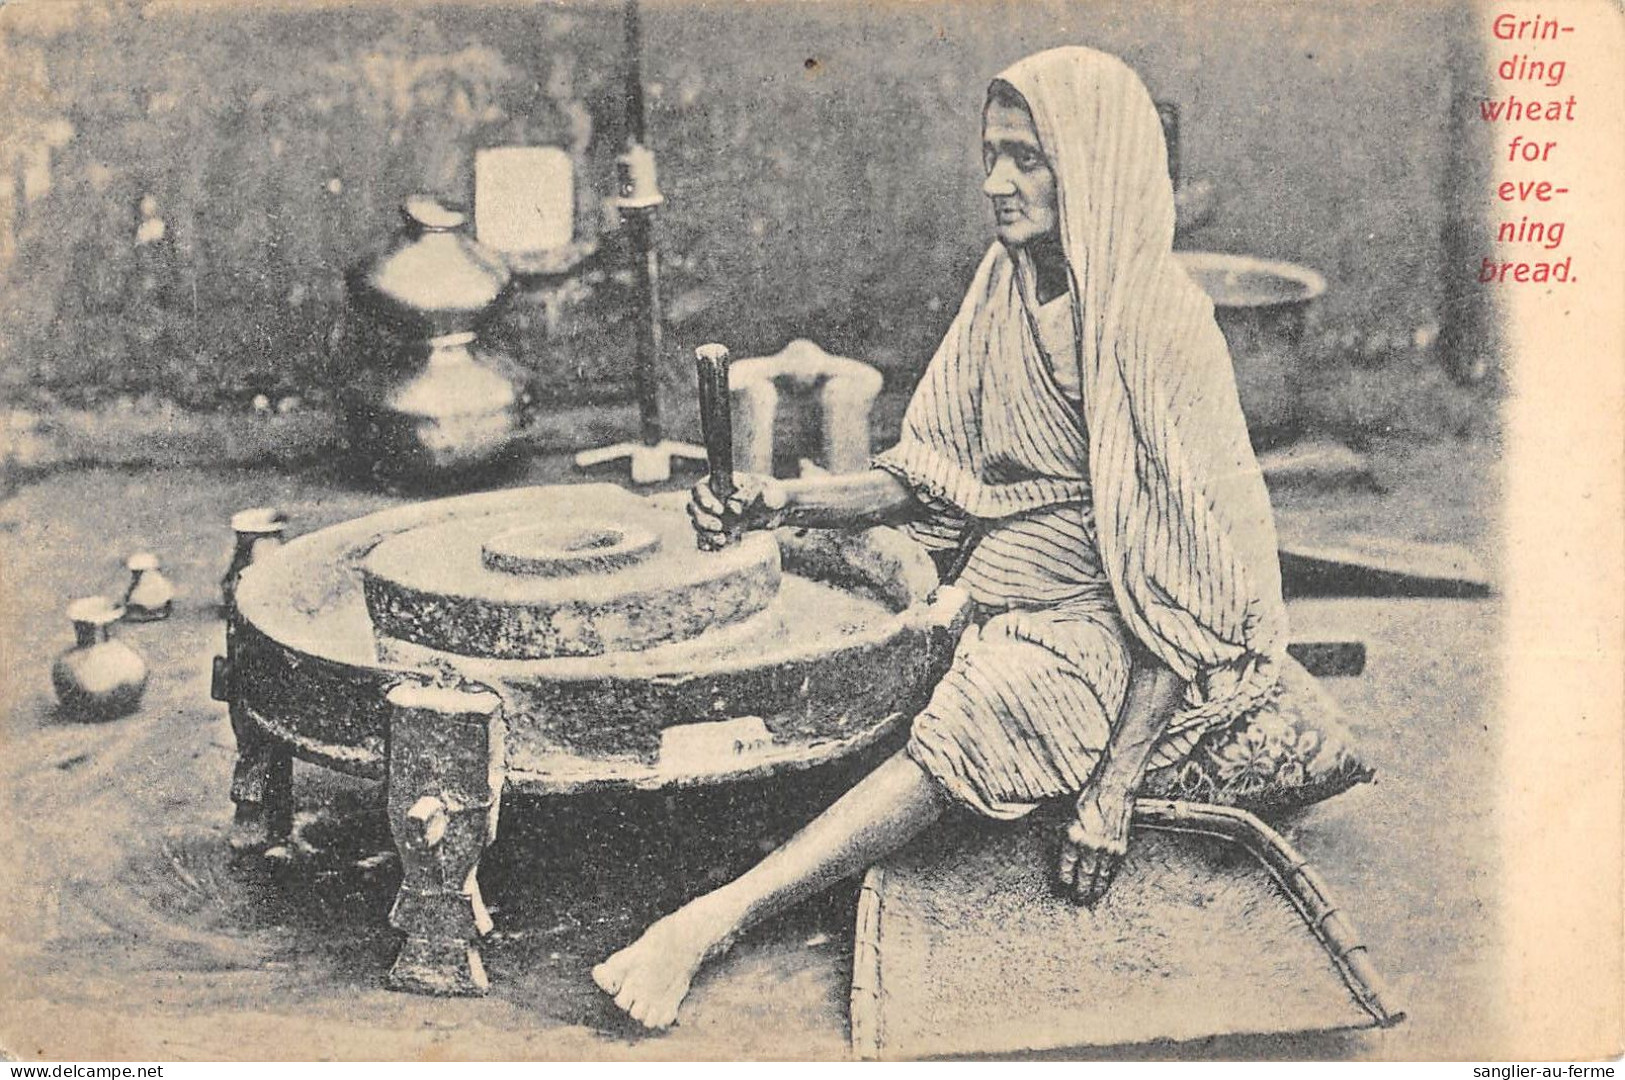 CPA INDE GRINDING WHEAT FOR EVENING BREAD - India